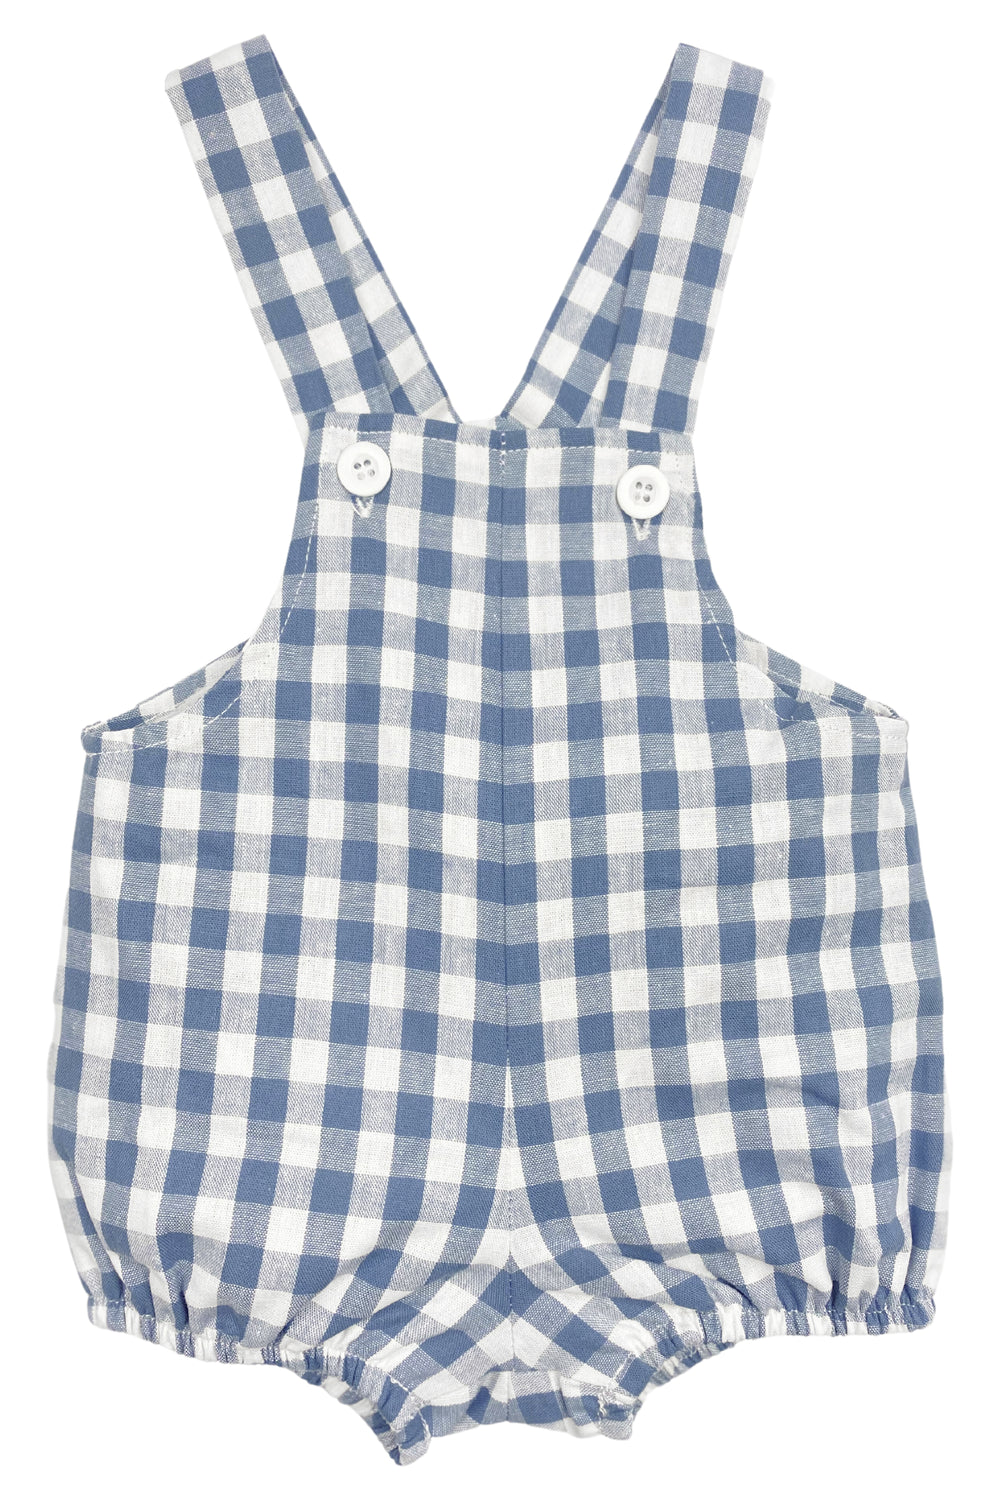 Cocote "Max" Gingham Dungaree Romper | iphoneandroidapplications